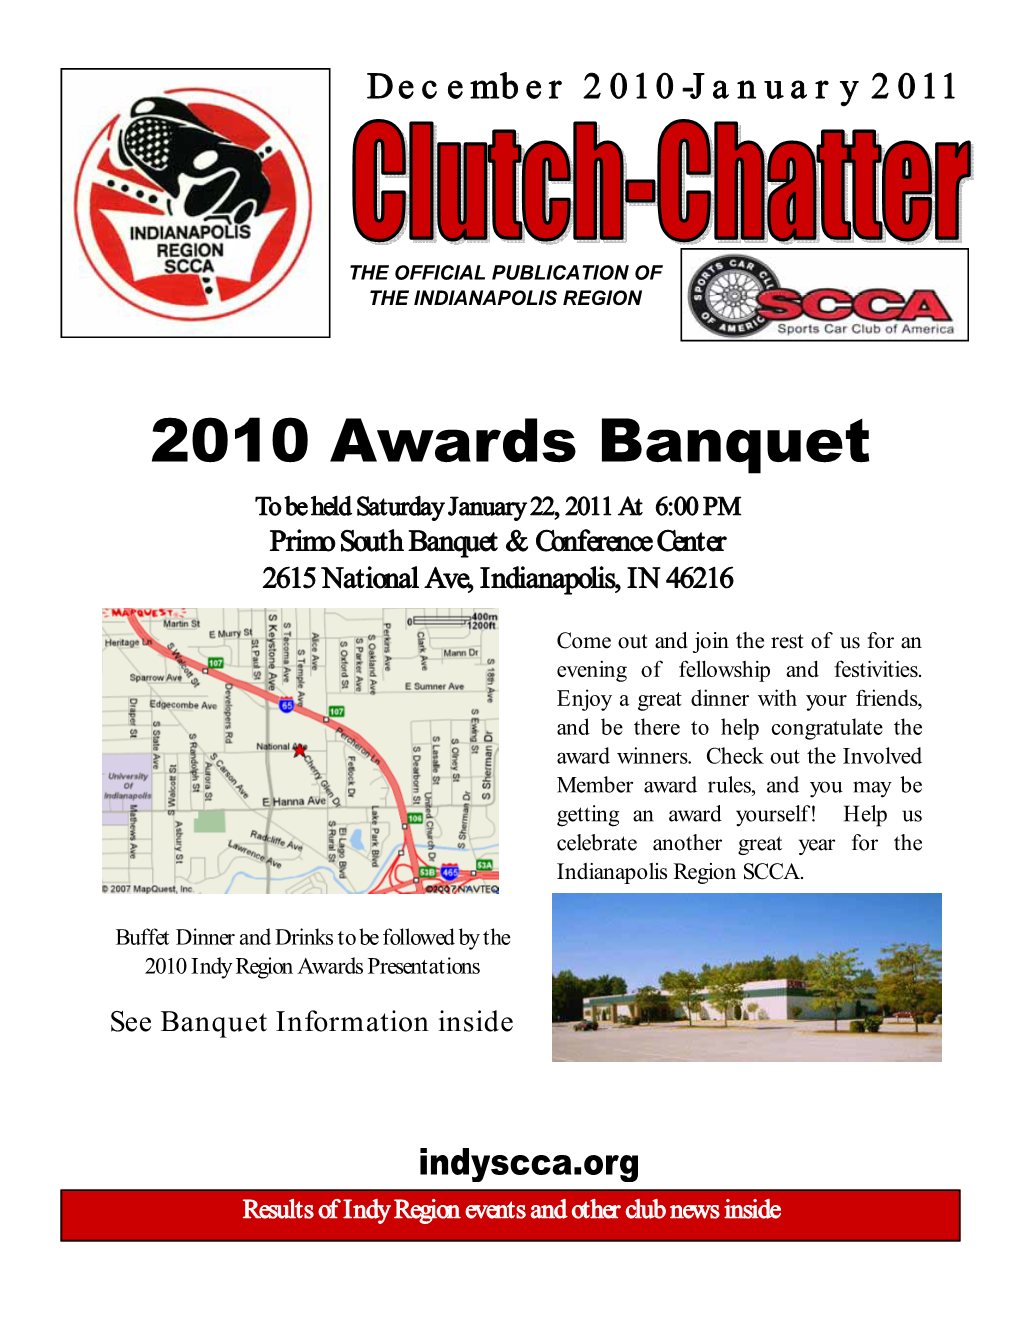 2010 Awards Banquet to Be Held Saturday January 22, 2011 at 6:00 PM Primo South Banquet & Conference Center 2615 National Ave, Indianapolis, in 46216